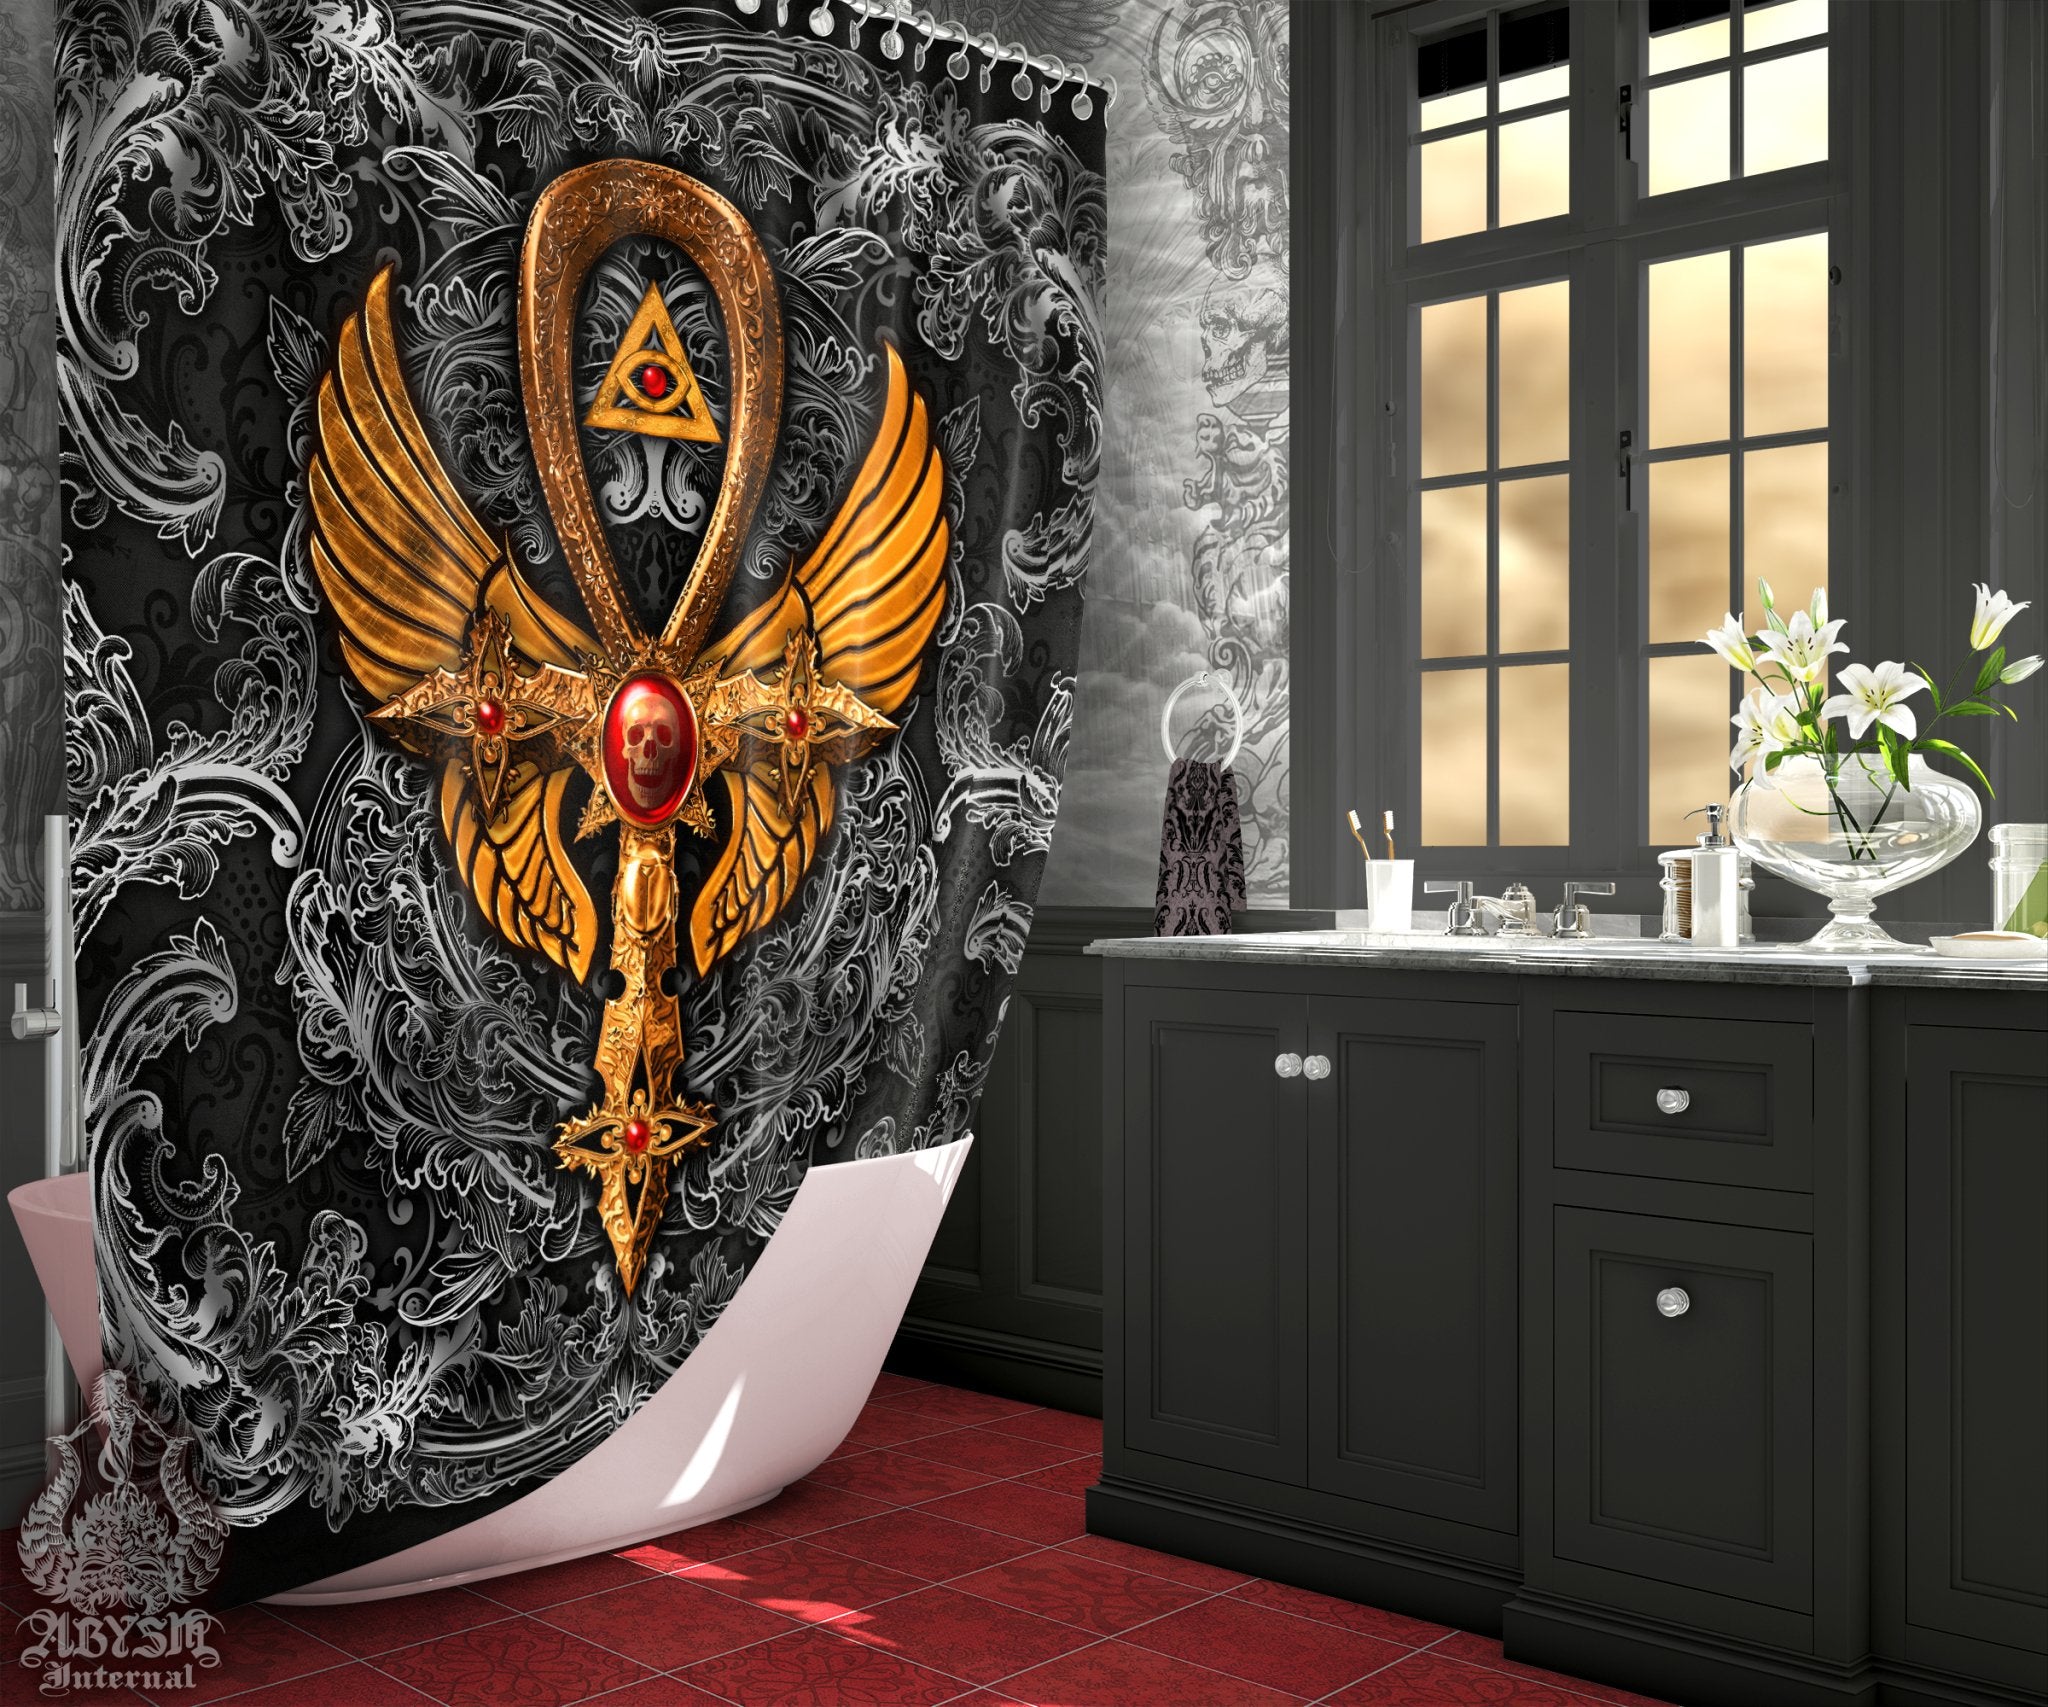 Black Goth Shower Curtain, 71x74 inches, Dark Ankh, Gothic Bathroom Decor, Occult - White, Red, Gold, 3 Colors - Abysm Internal